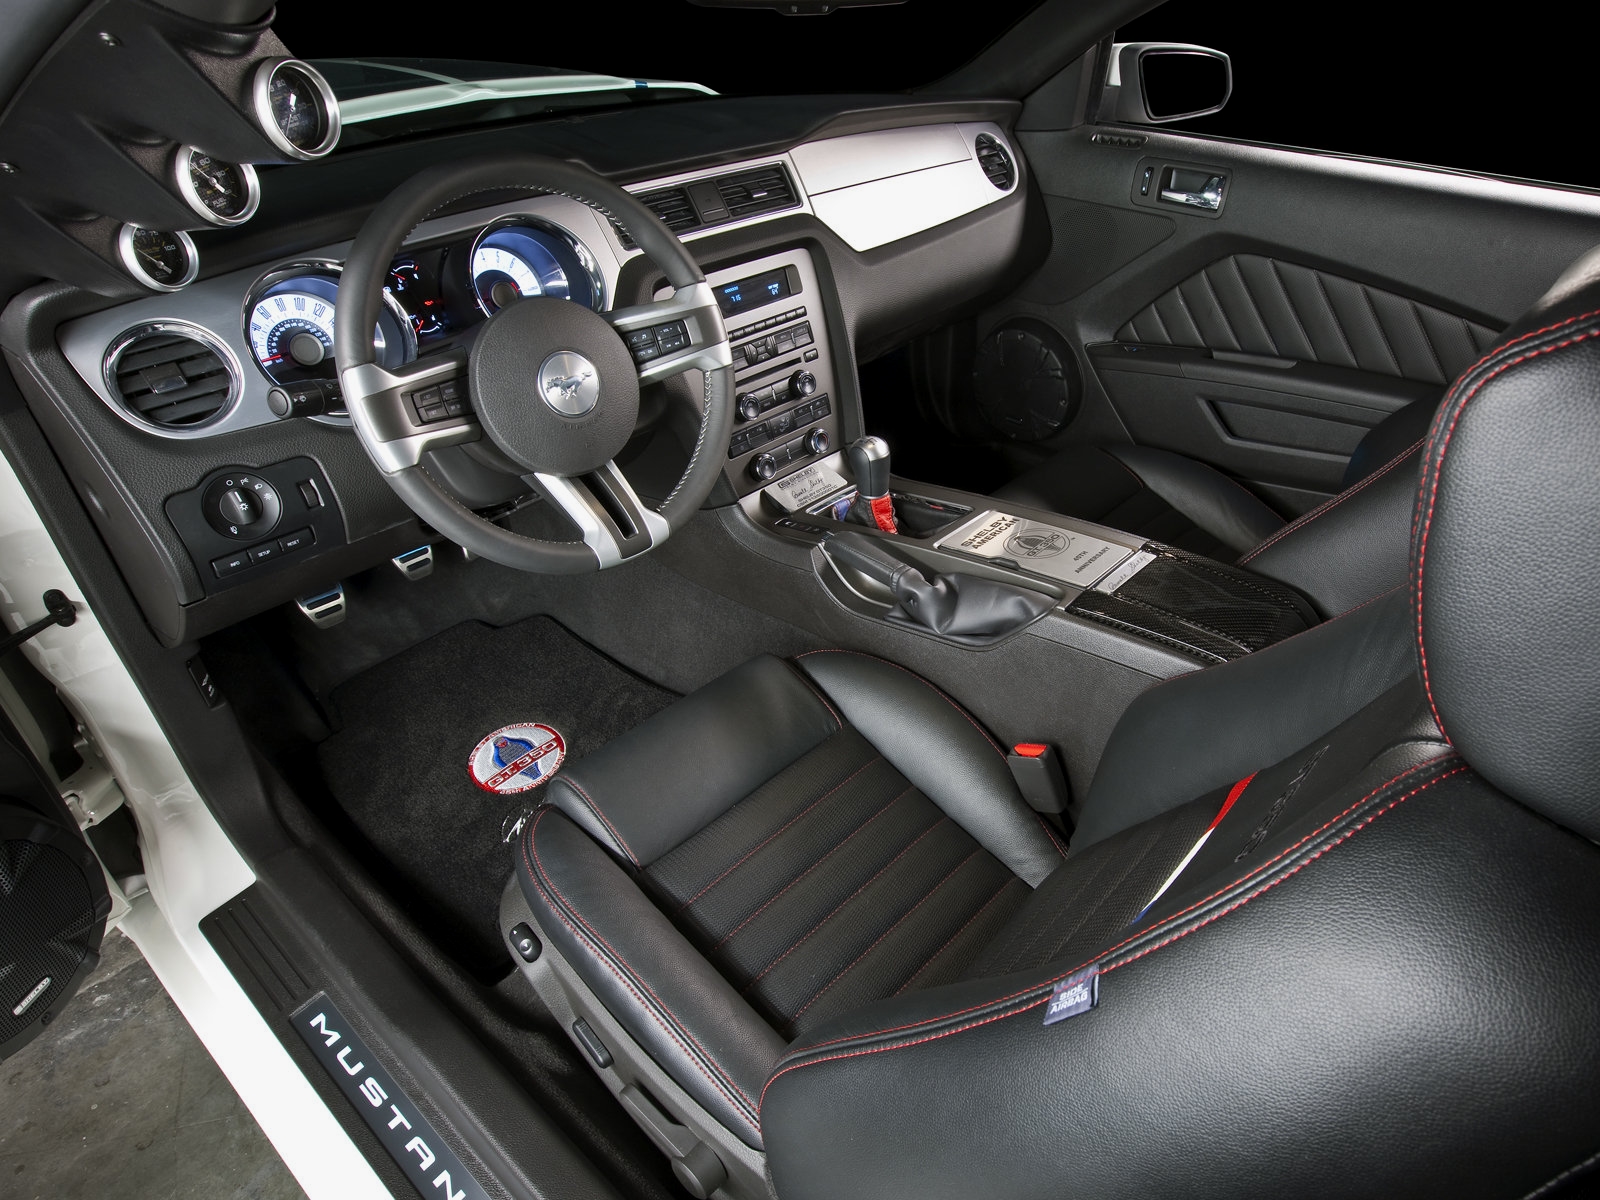 2010, Shelby, Gt350, Ford, Mustang, Muscle, Interior Wallpaper